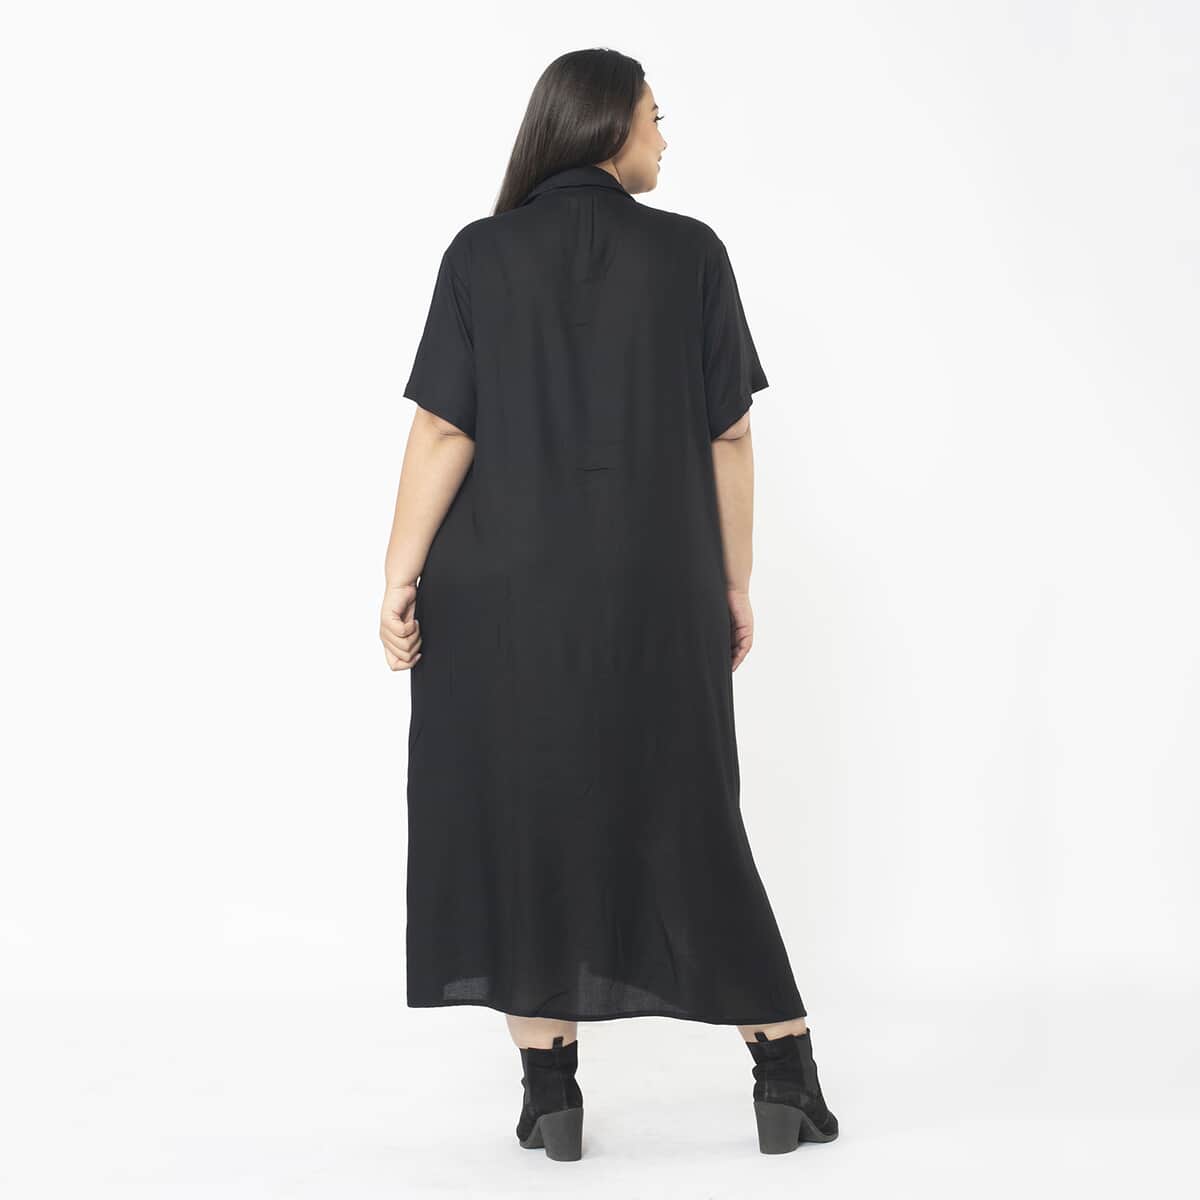 Tamsy Black Collar Dress with 3/4 Sleeve -S/M image number 1